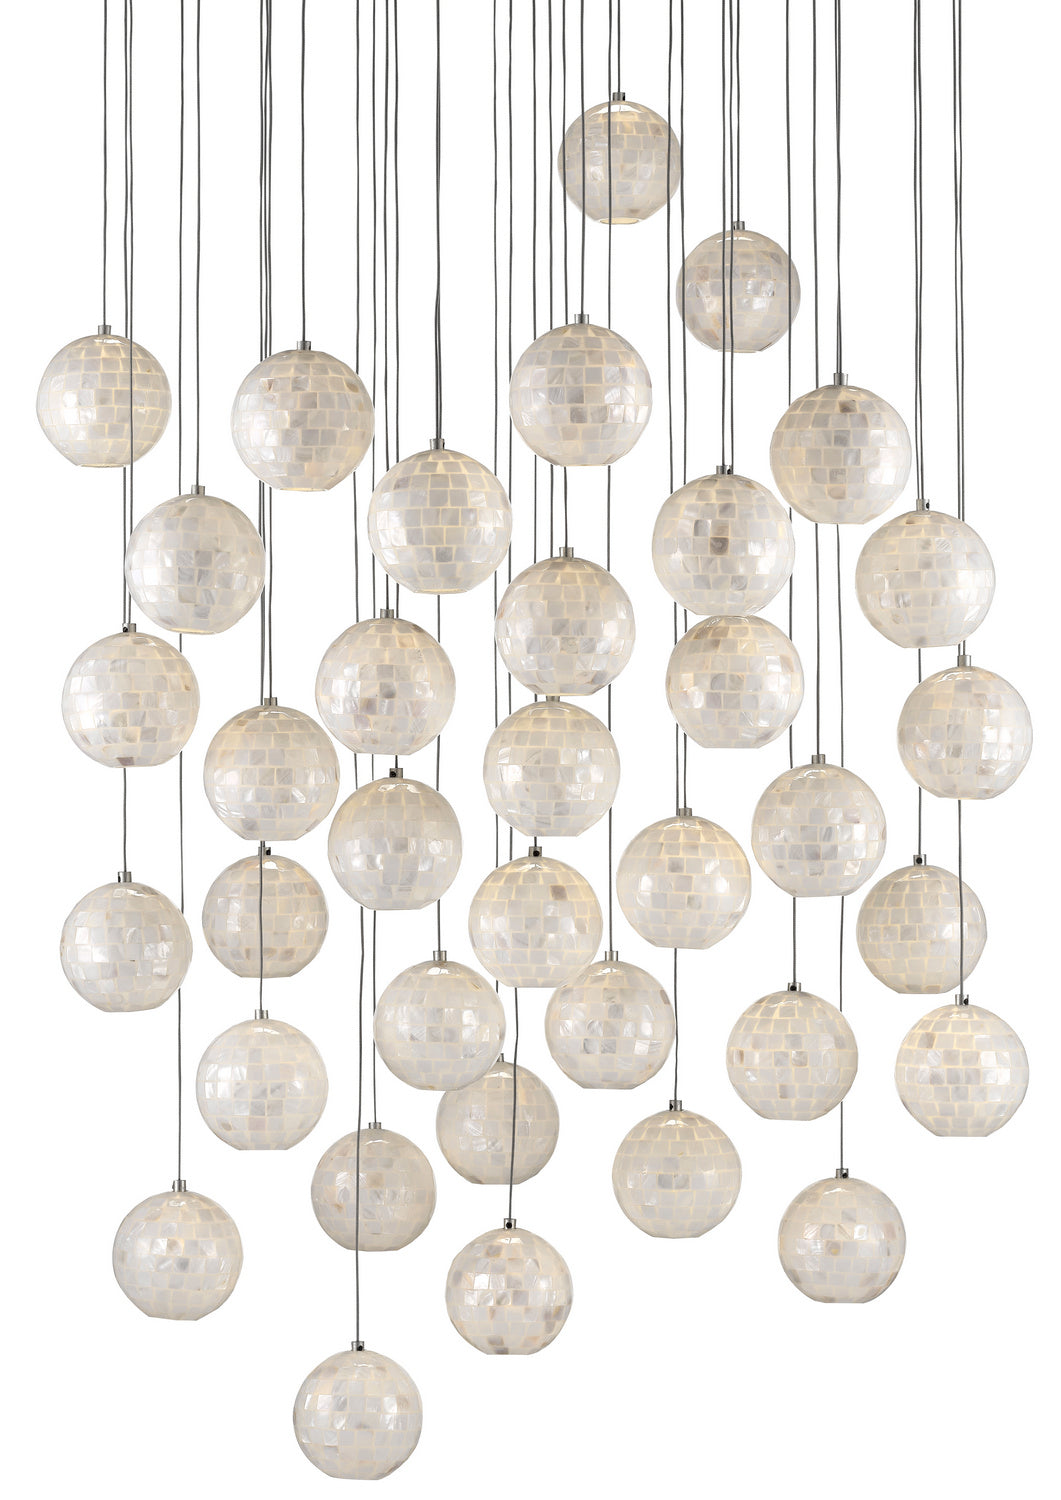 36 Light Pendant from the Finhorn collection in Painted Silver/Pearl finish